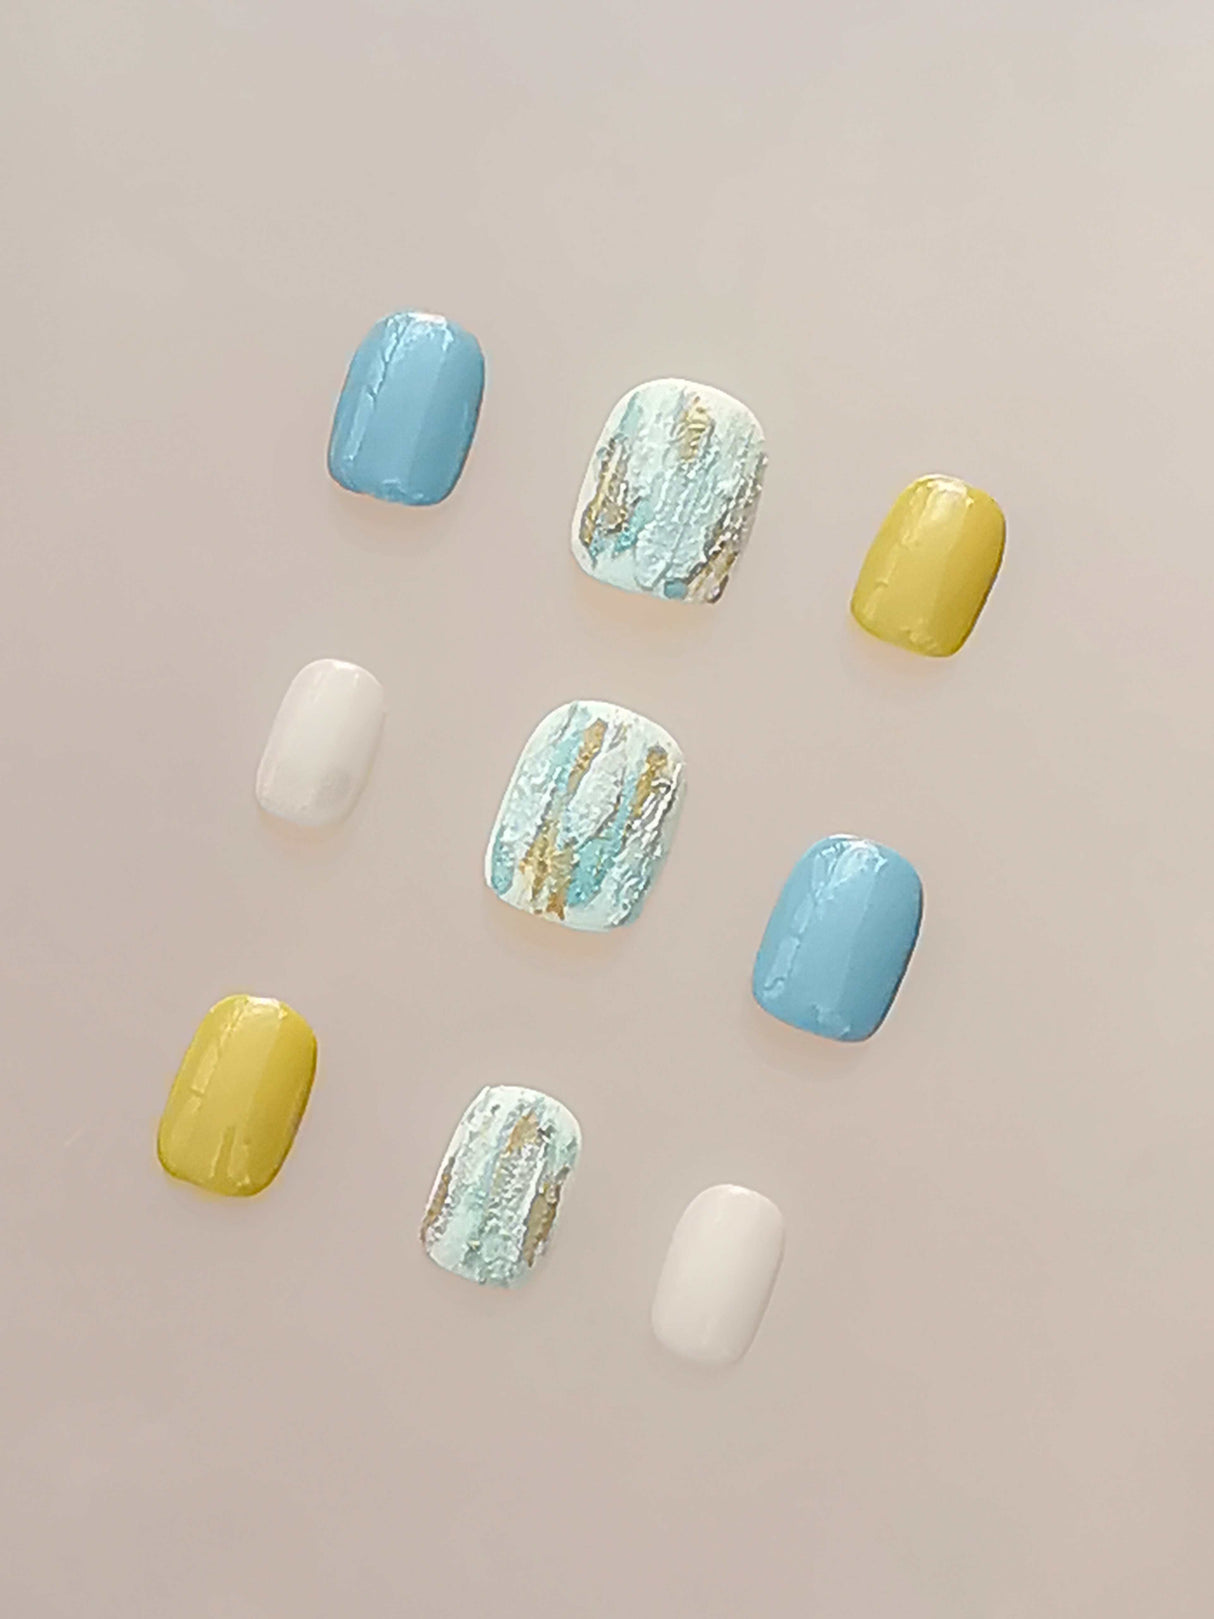 Luxury nails with various designs and colors for personal fashion and style. Metallic embellishments add uniqueness and edginess to enhance appearance.